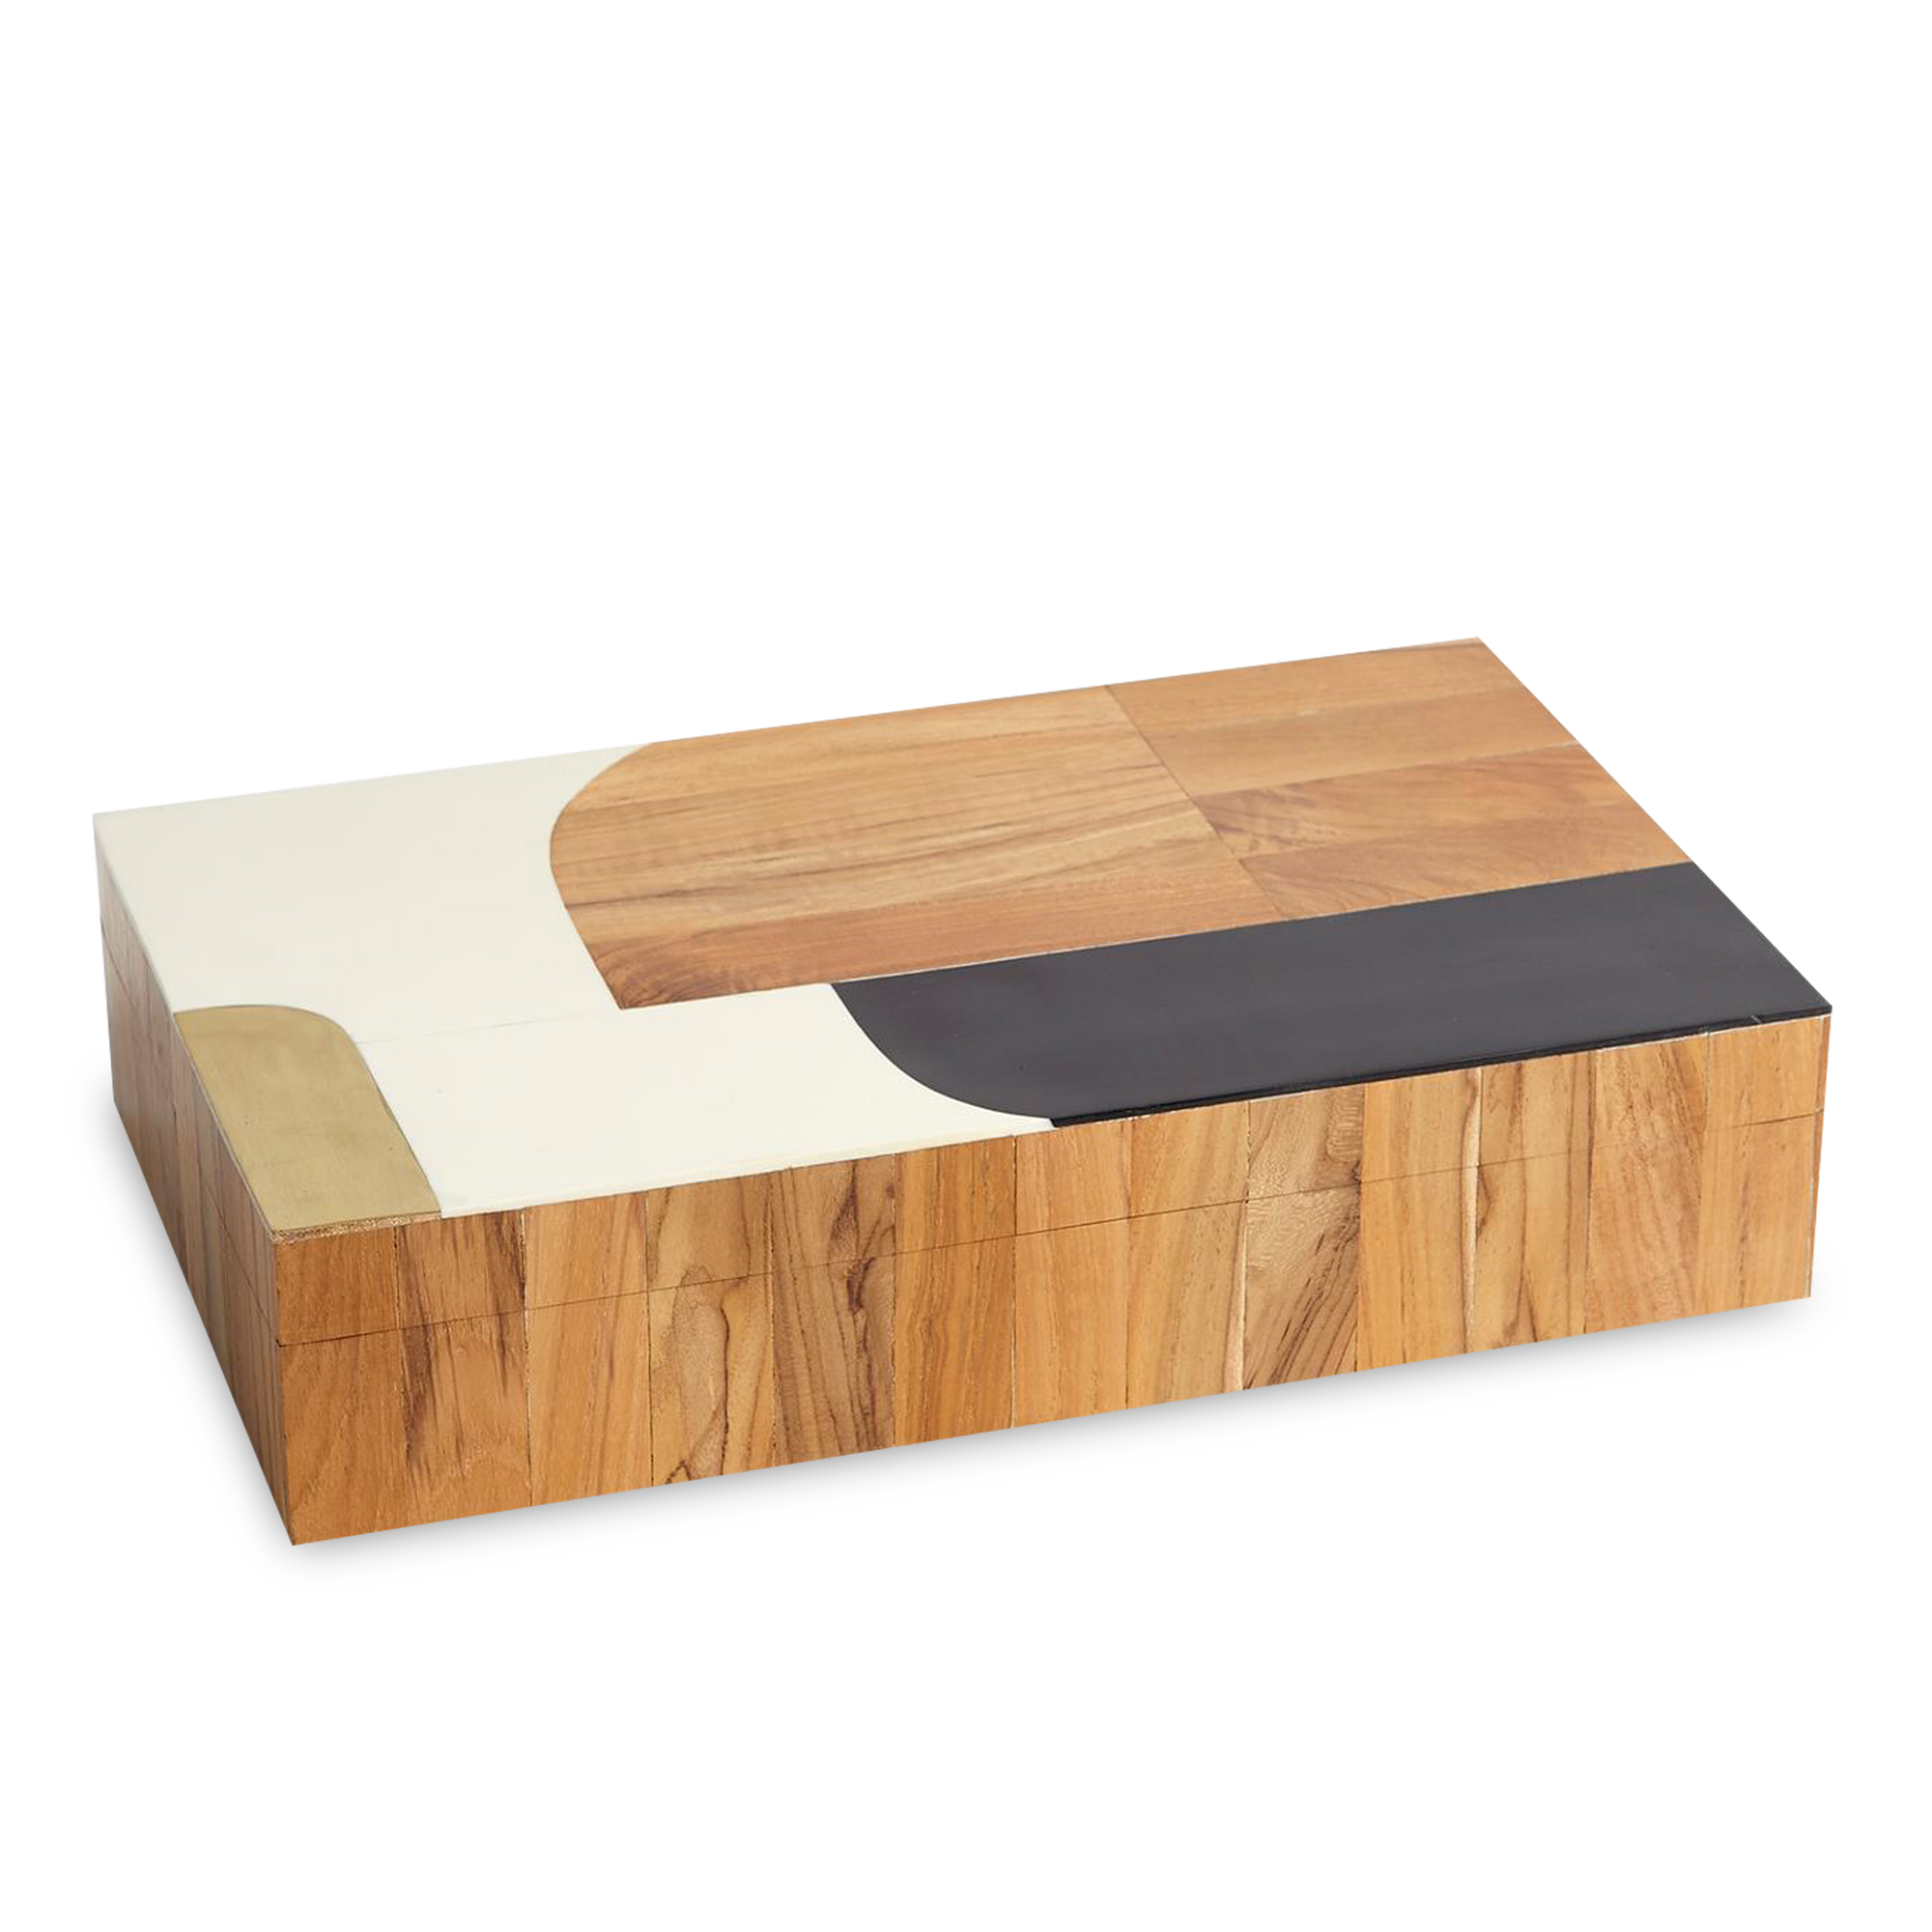 Teak wood, resin and brass join forces to create these abstract boxes.